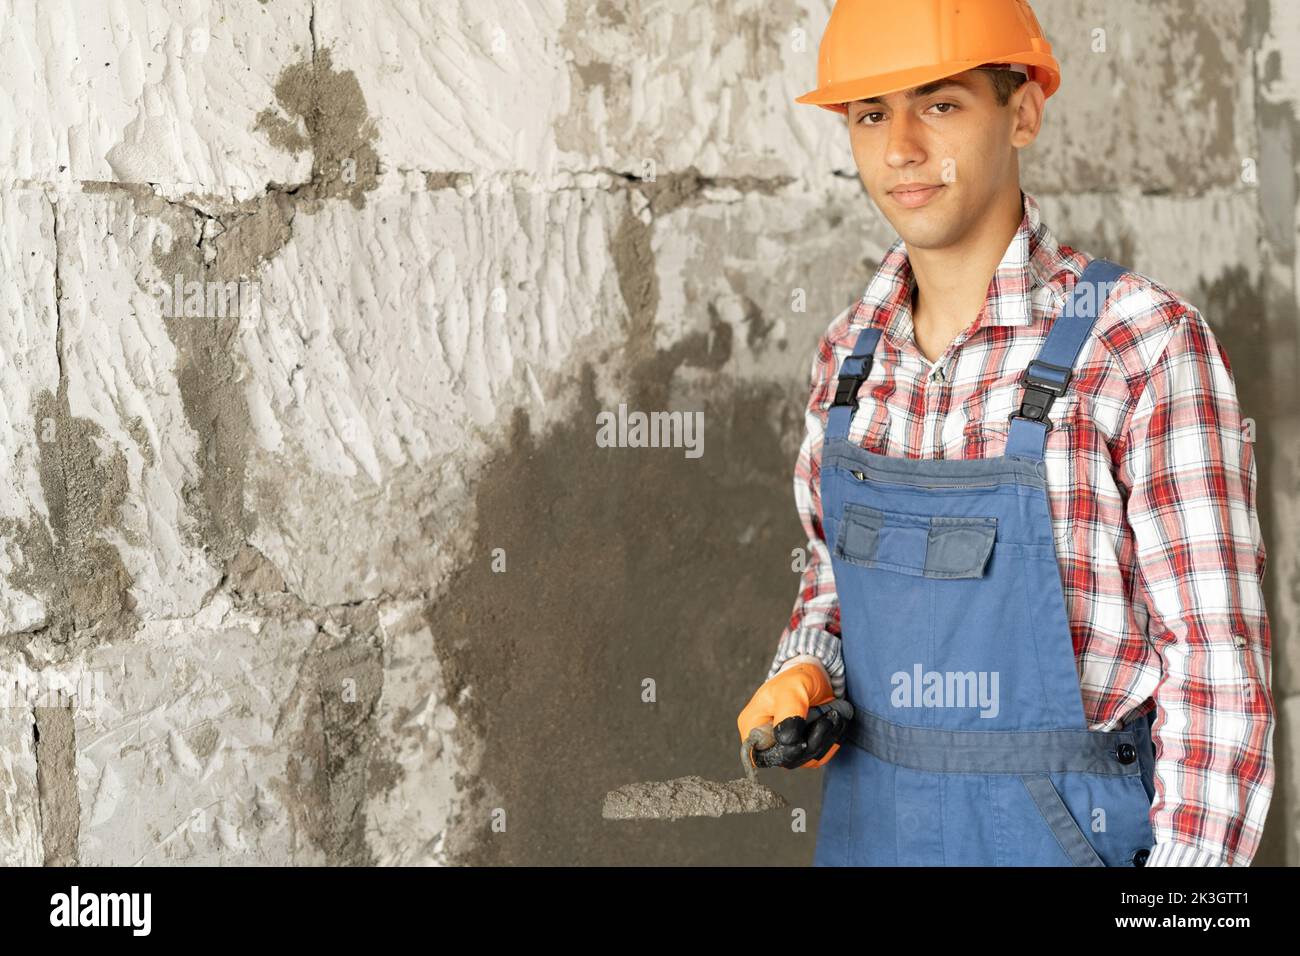 close up of builder worker plasterer holding trowel to plastering cement wall in construction site. building construction work and industry concept Stock Photo